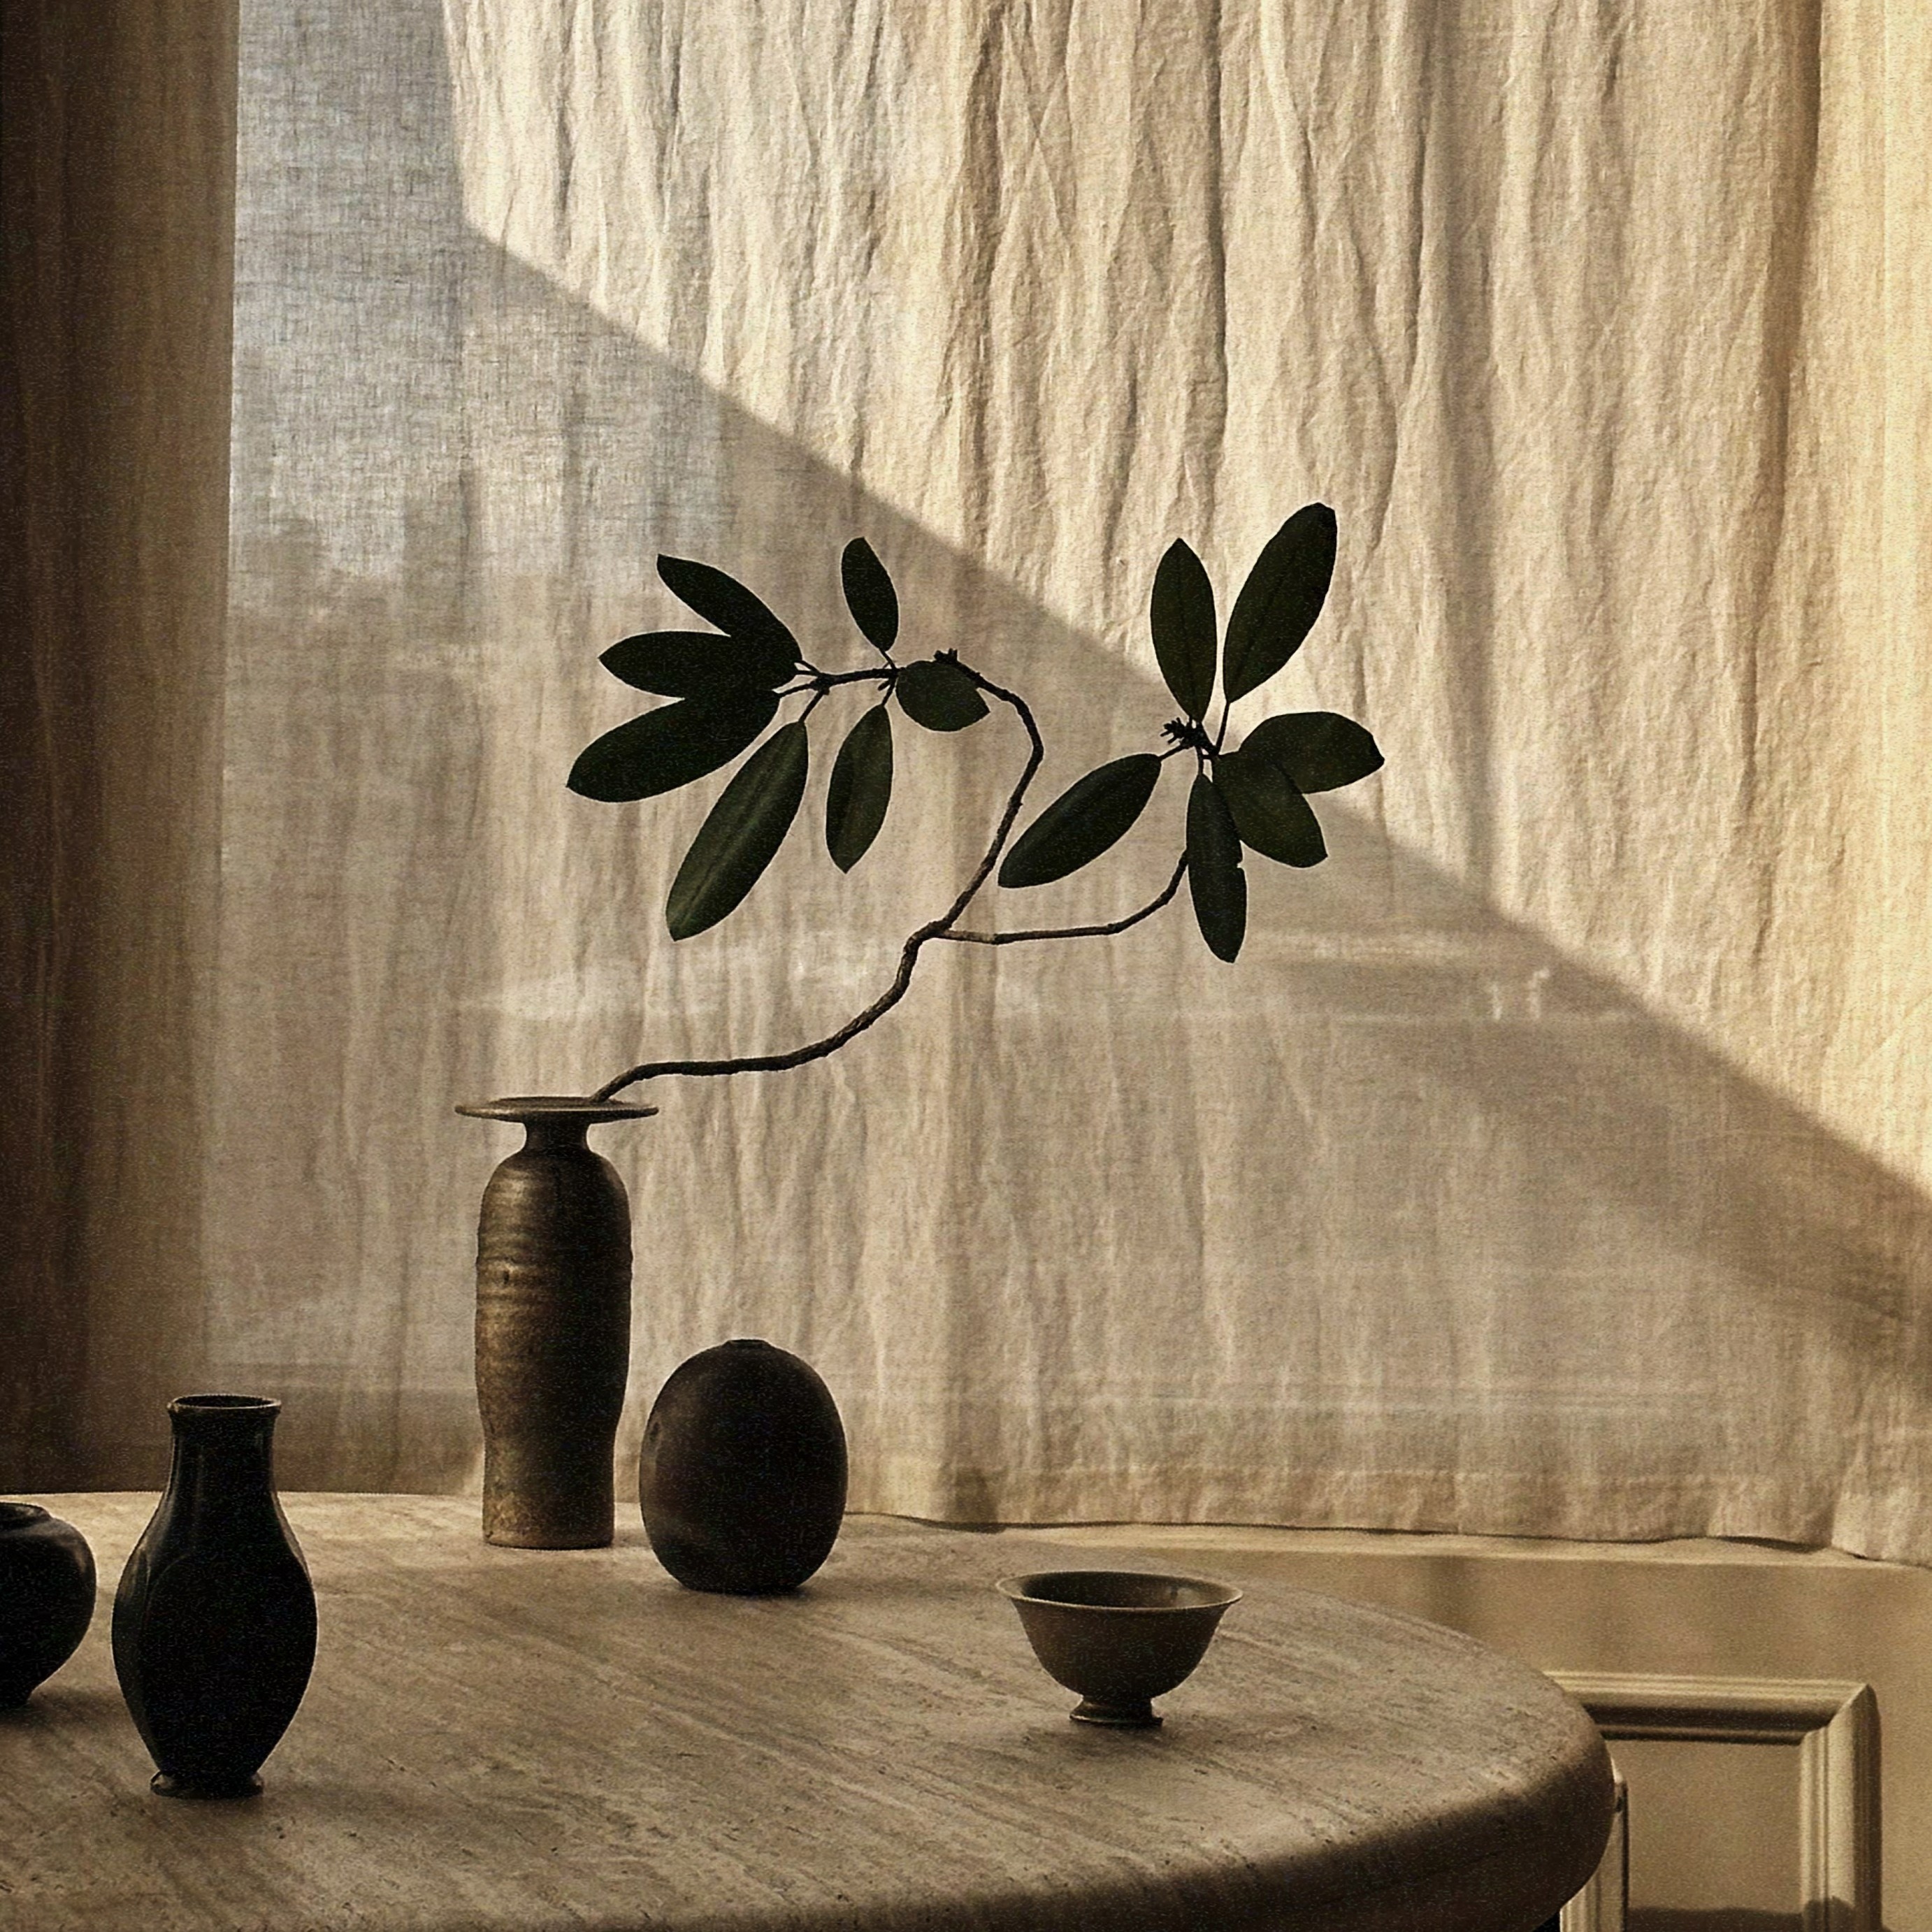 a table with vases and a vase on it in front of a window